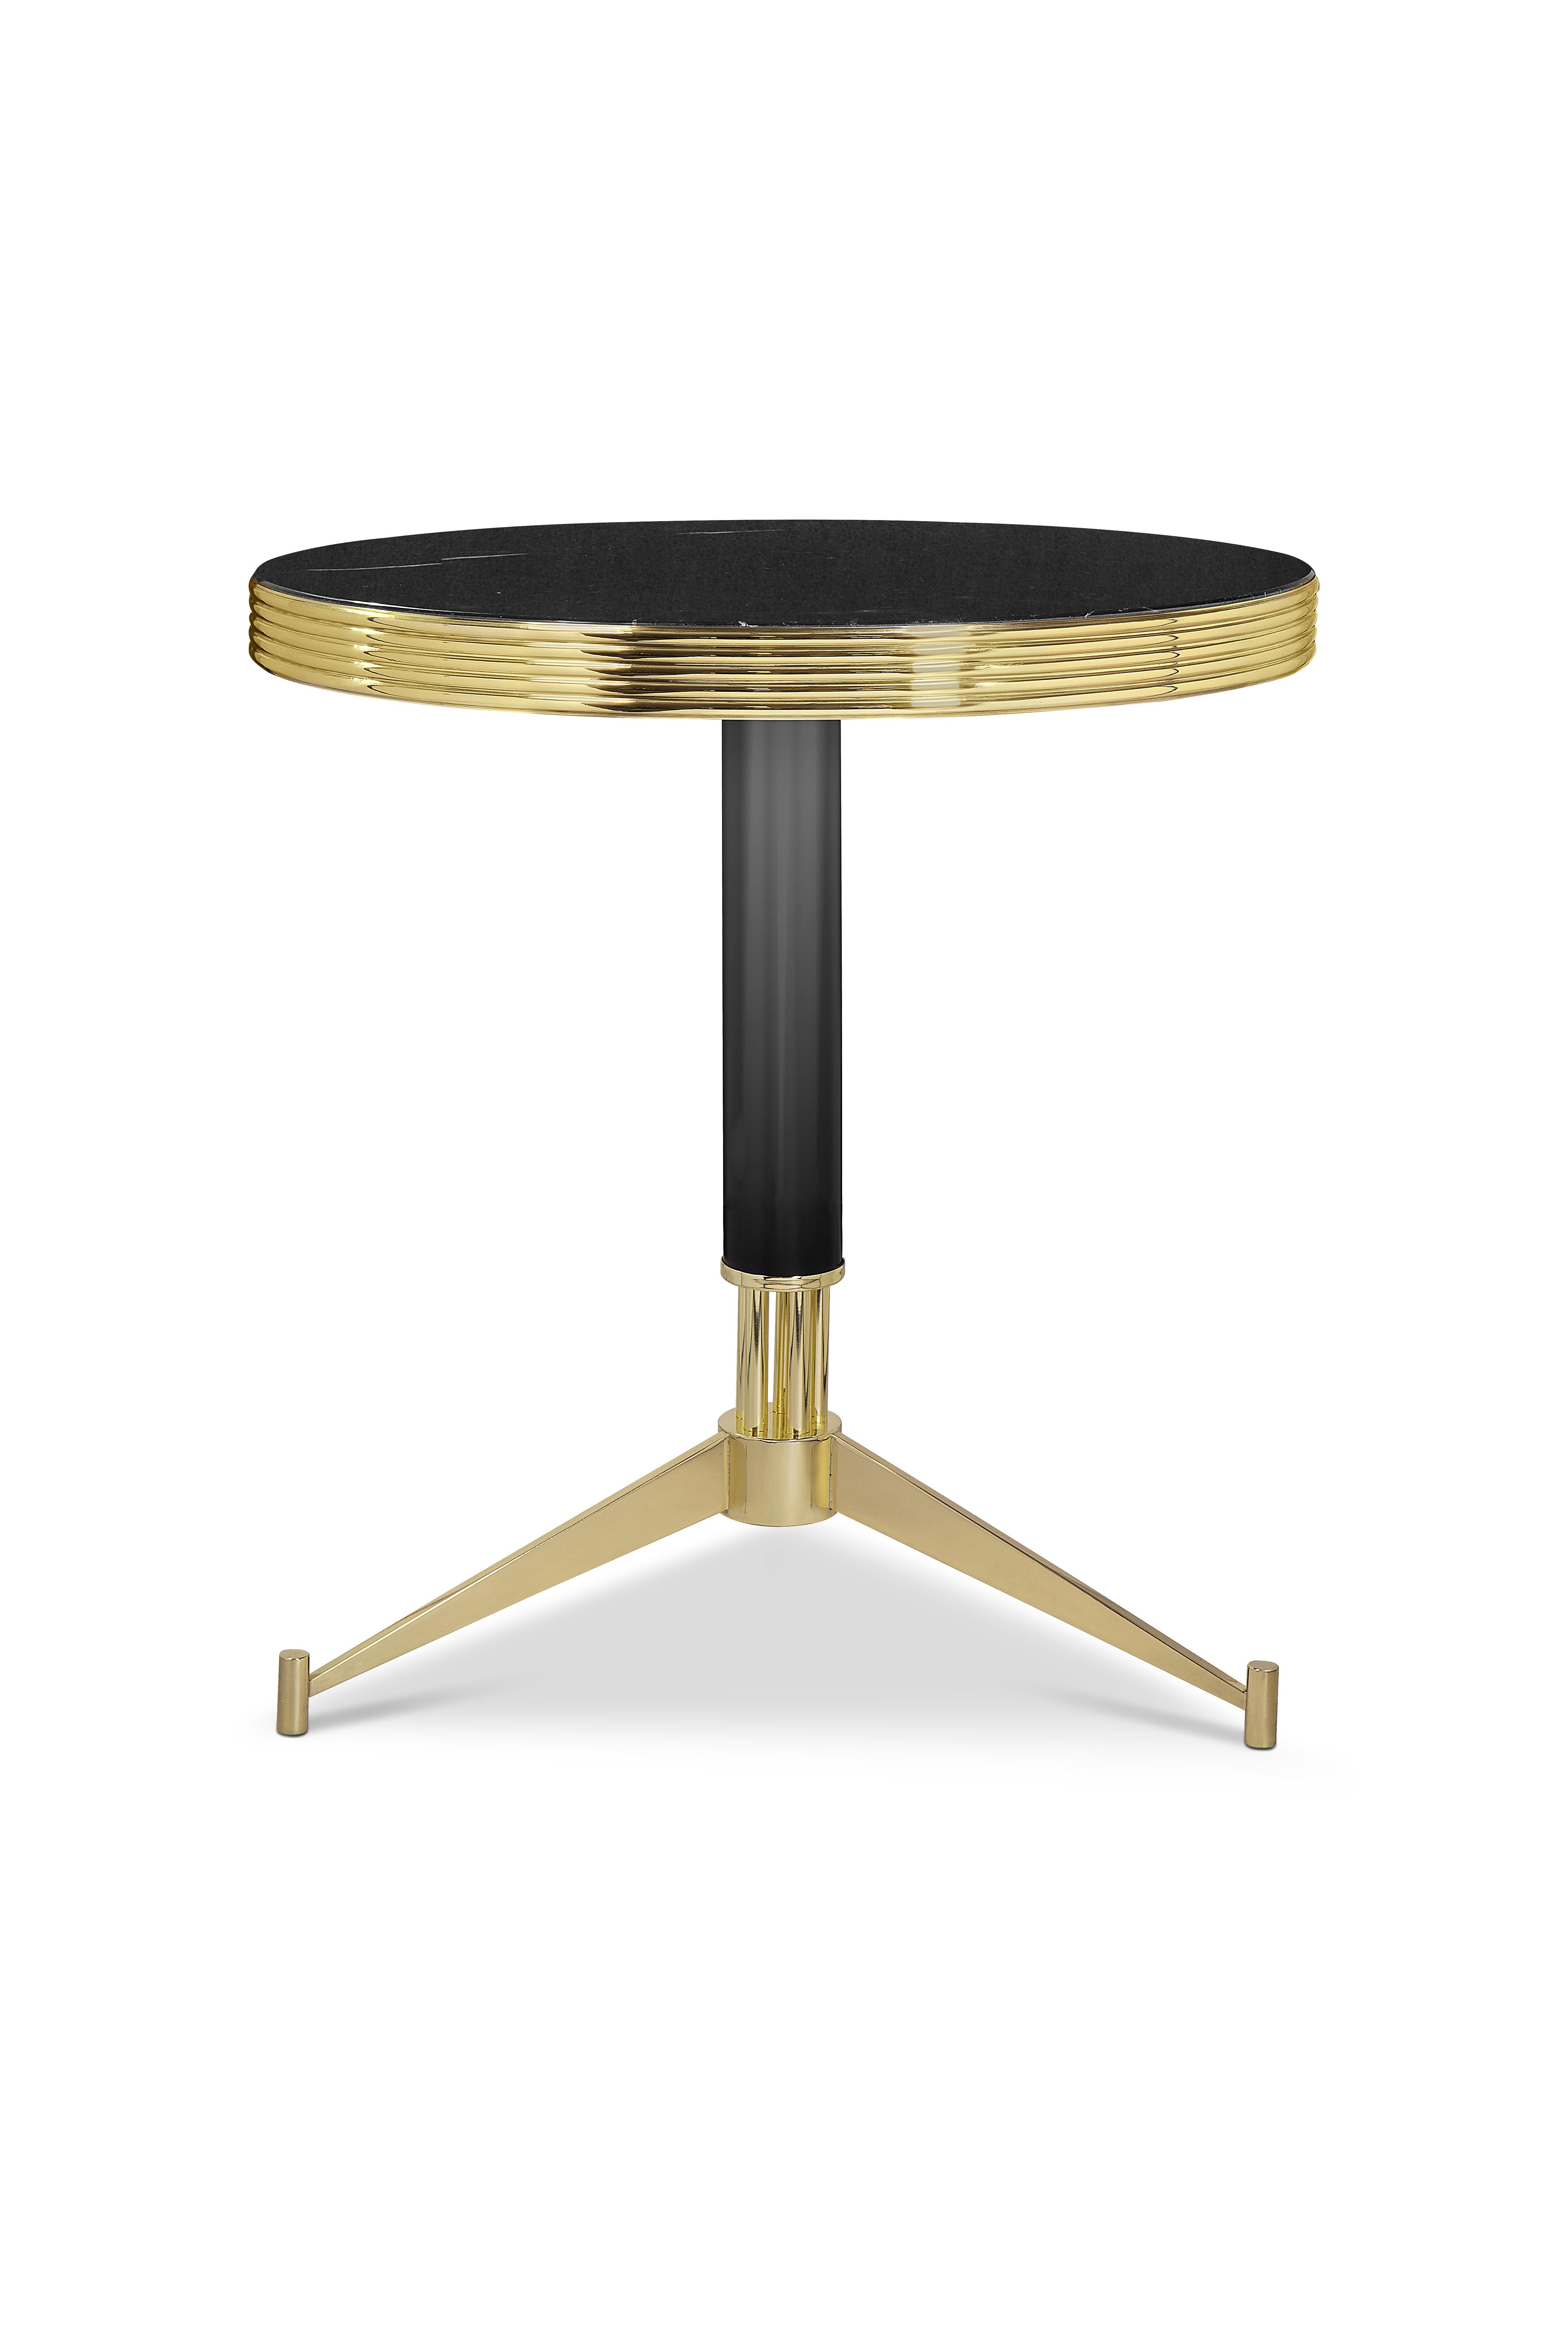 Inspired in the fundamentals of midcentury modern design, Dolly Coffee Table is the perfect touch for a stylish Parisiense lounge bar. With a beautiful marble top and base, and a golden eye-catching support, Dolly Coffee Table is the perfect detail